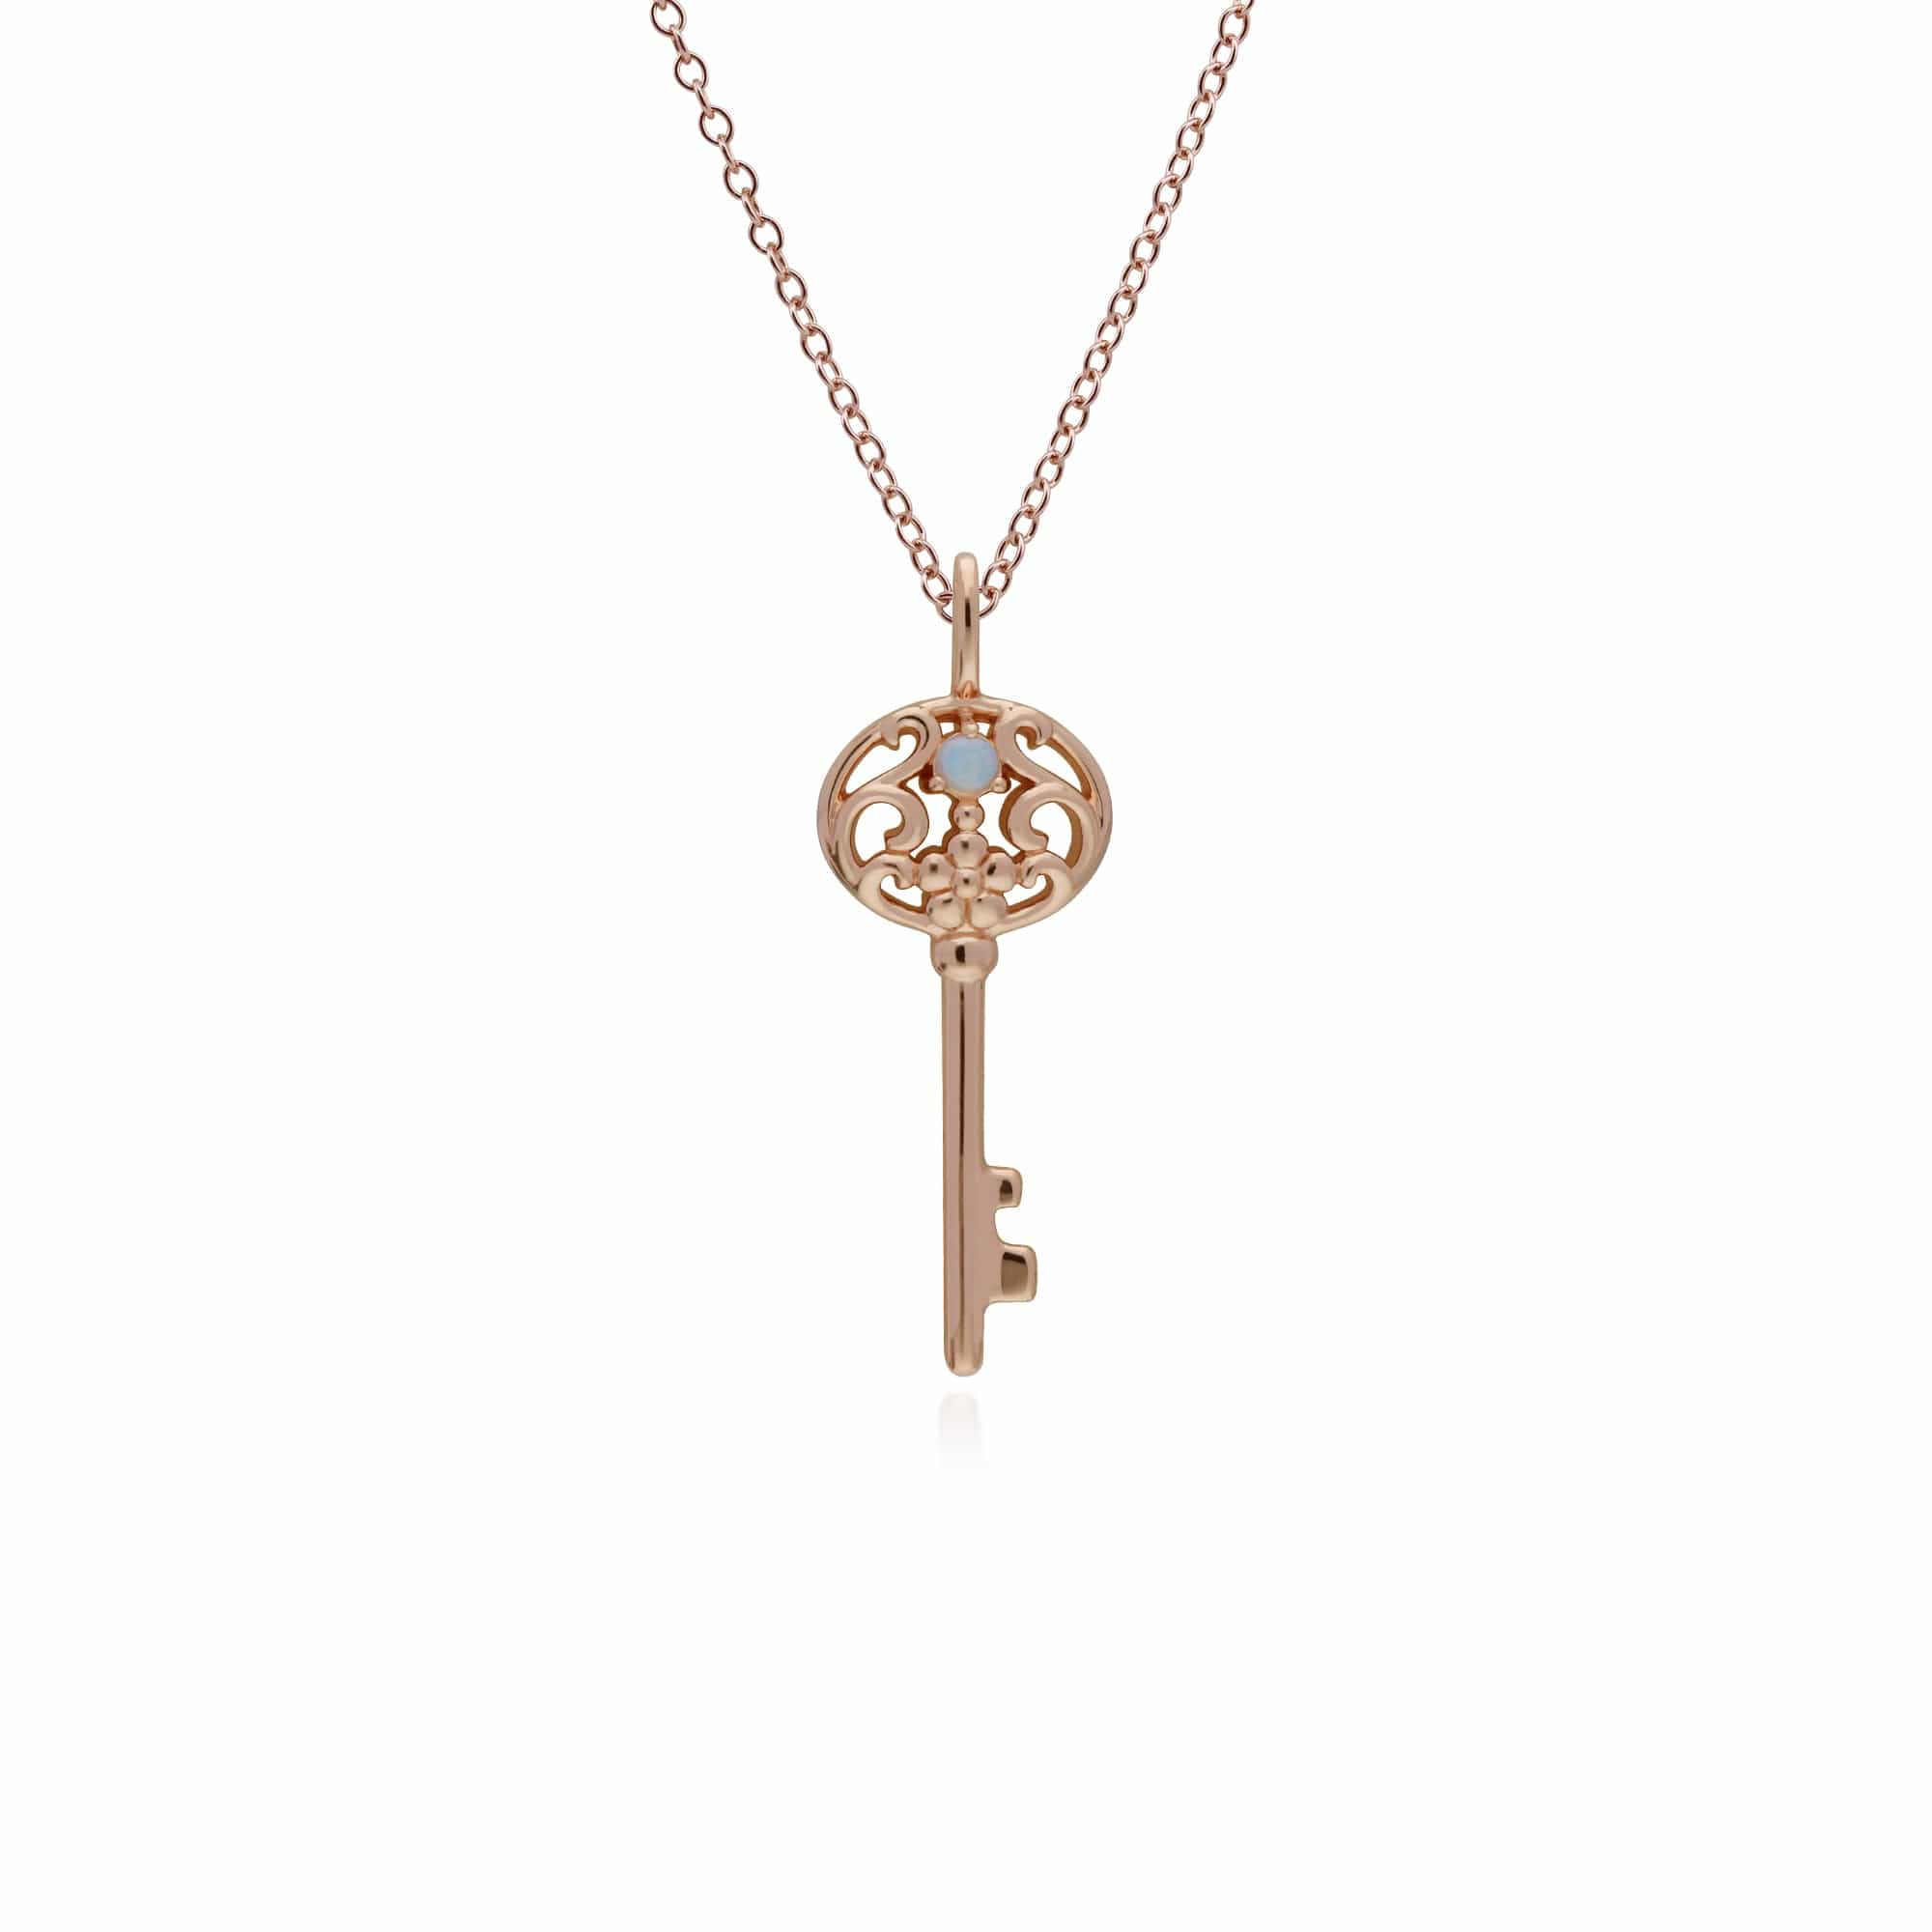 Rose gold plated opal key necklace